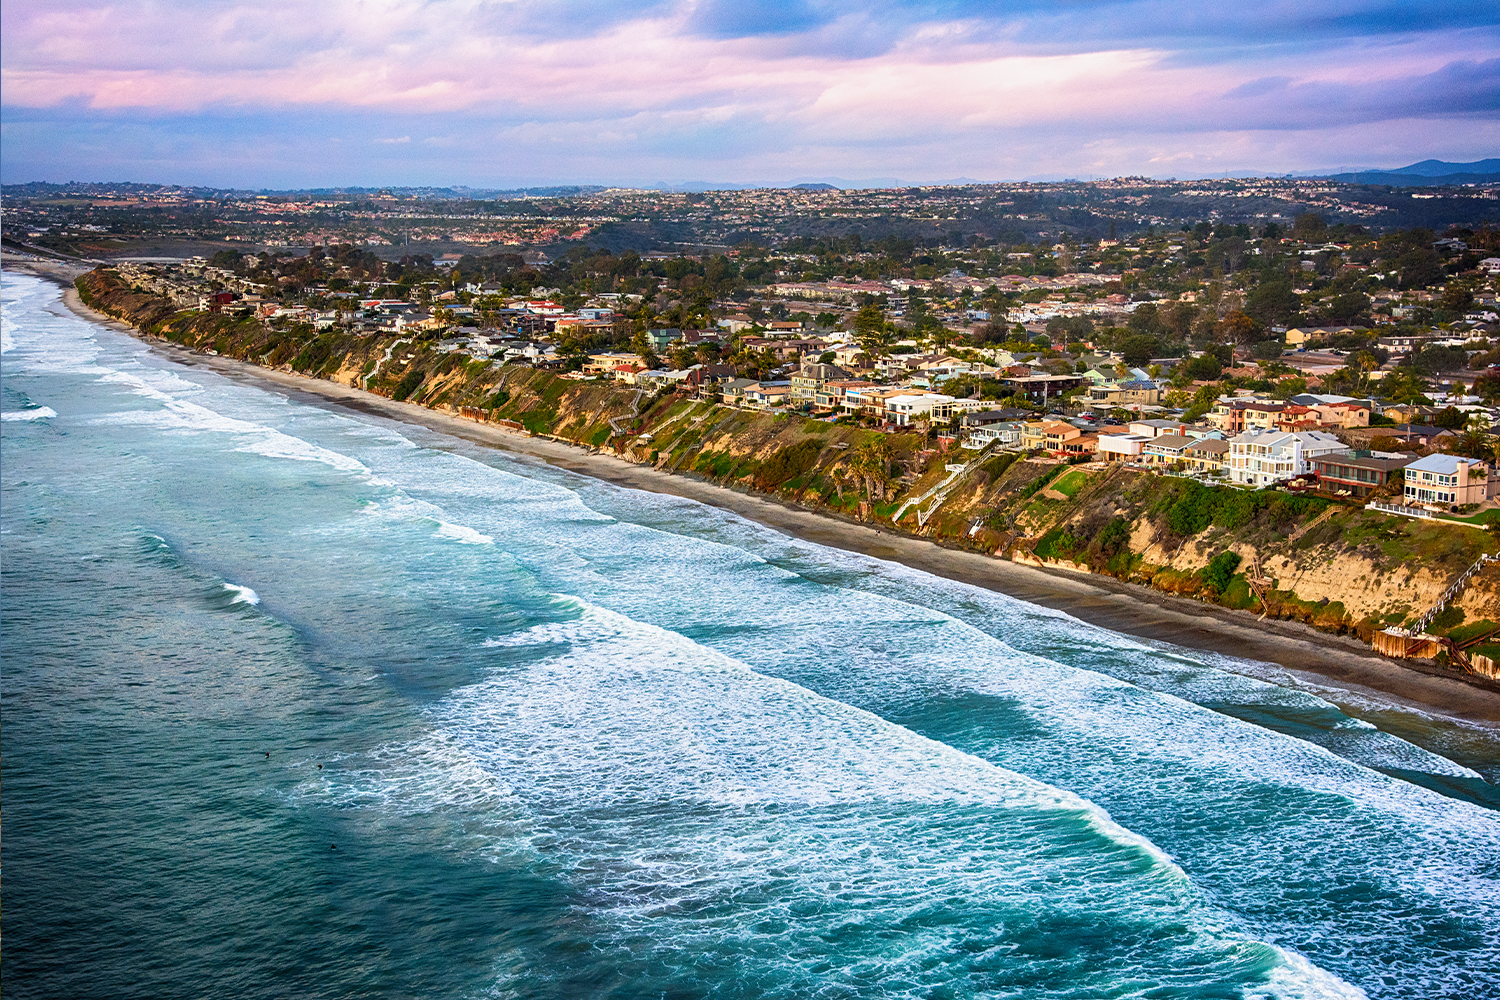 The coastal cliffs and oceanfront homes of Leucadia in Encinitas